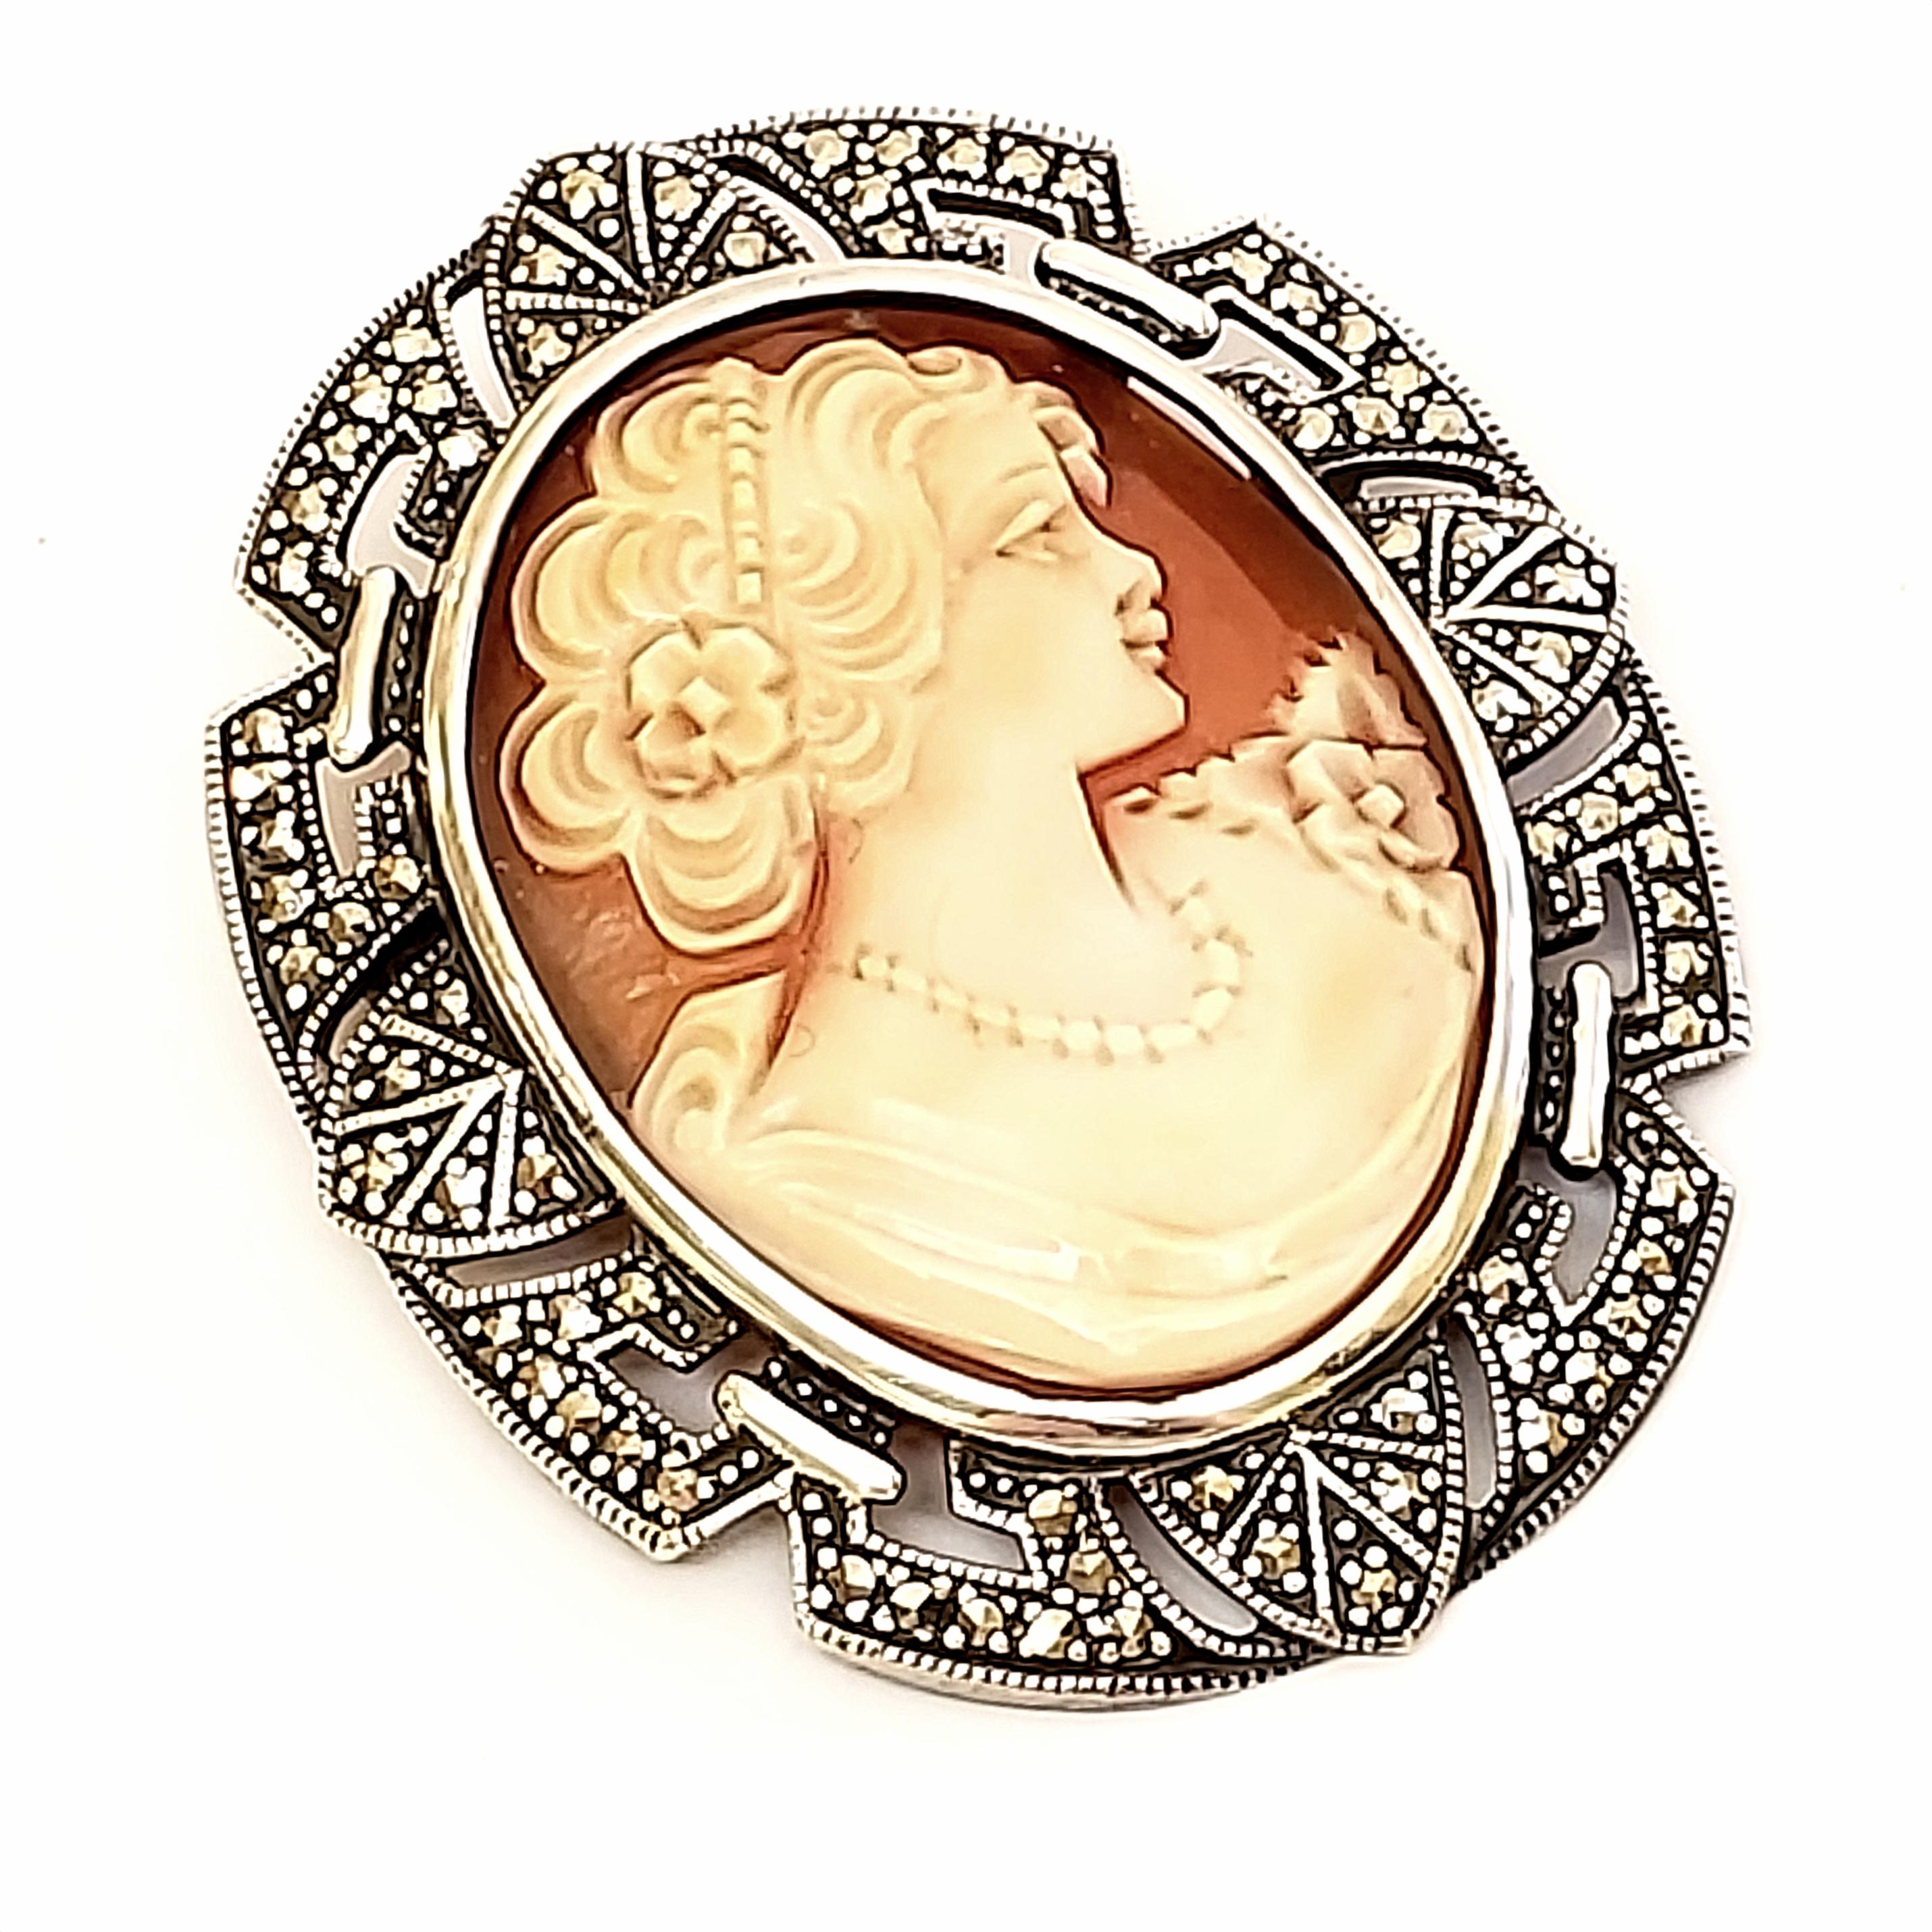 Sterling silver and marcasite cameo pin and pendant.

This beautiful cameo features a lady's portrait in a marcasite sterling silver frame. Can be worn as a pin or pendant.

Measures 1 11/16